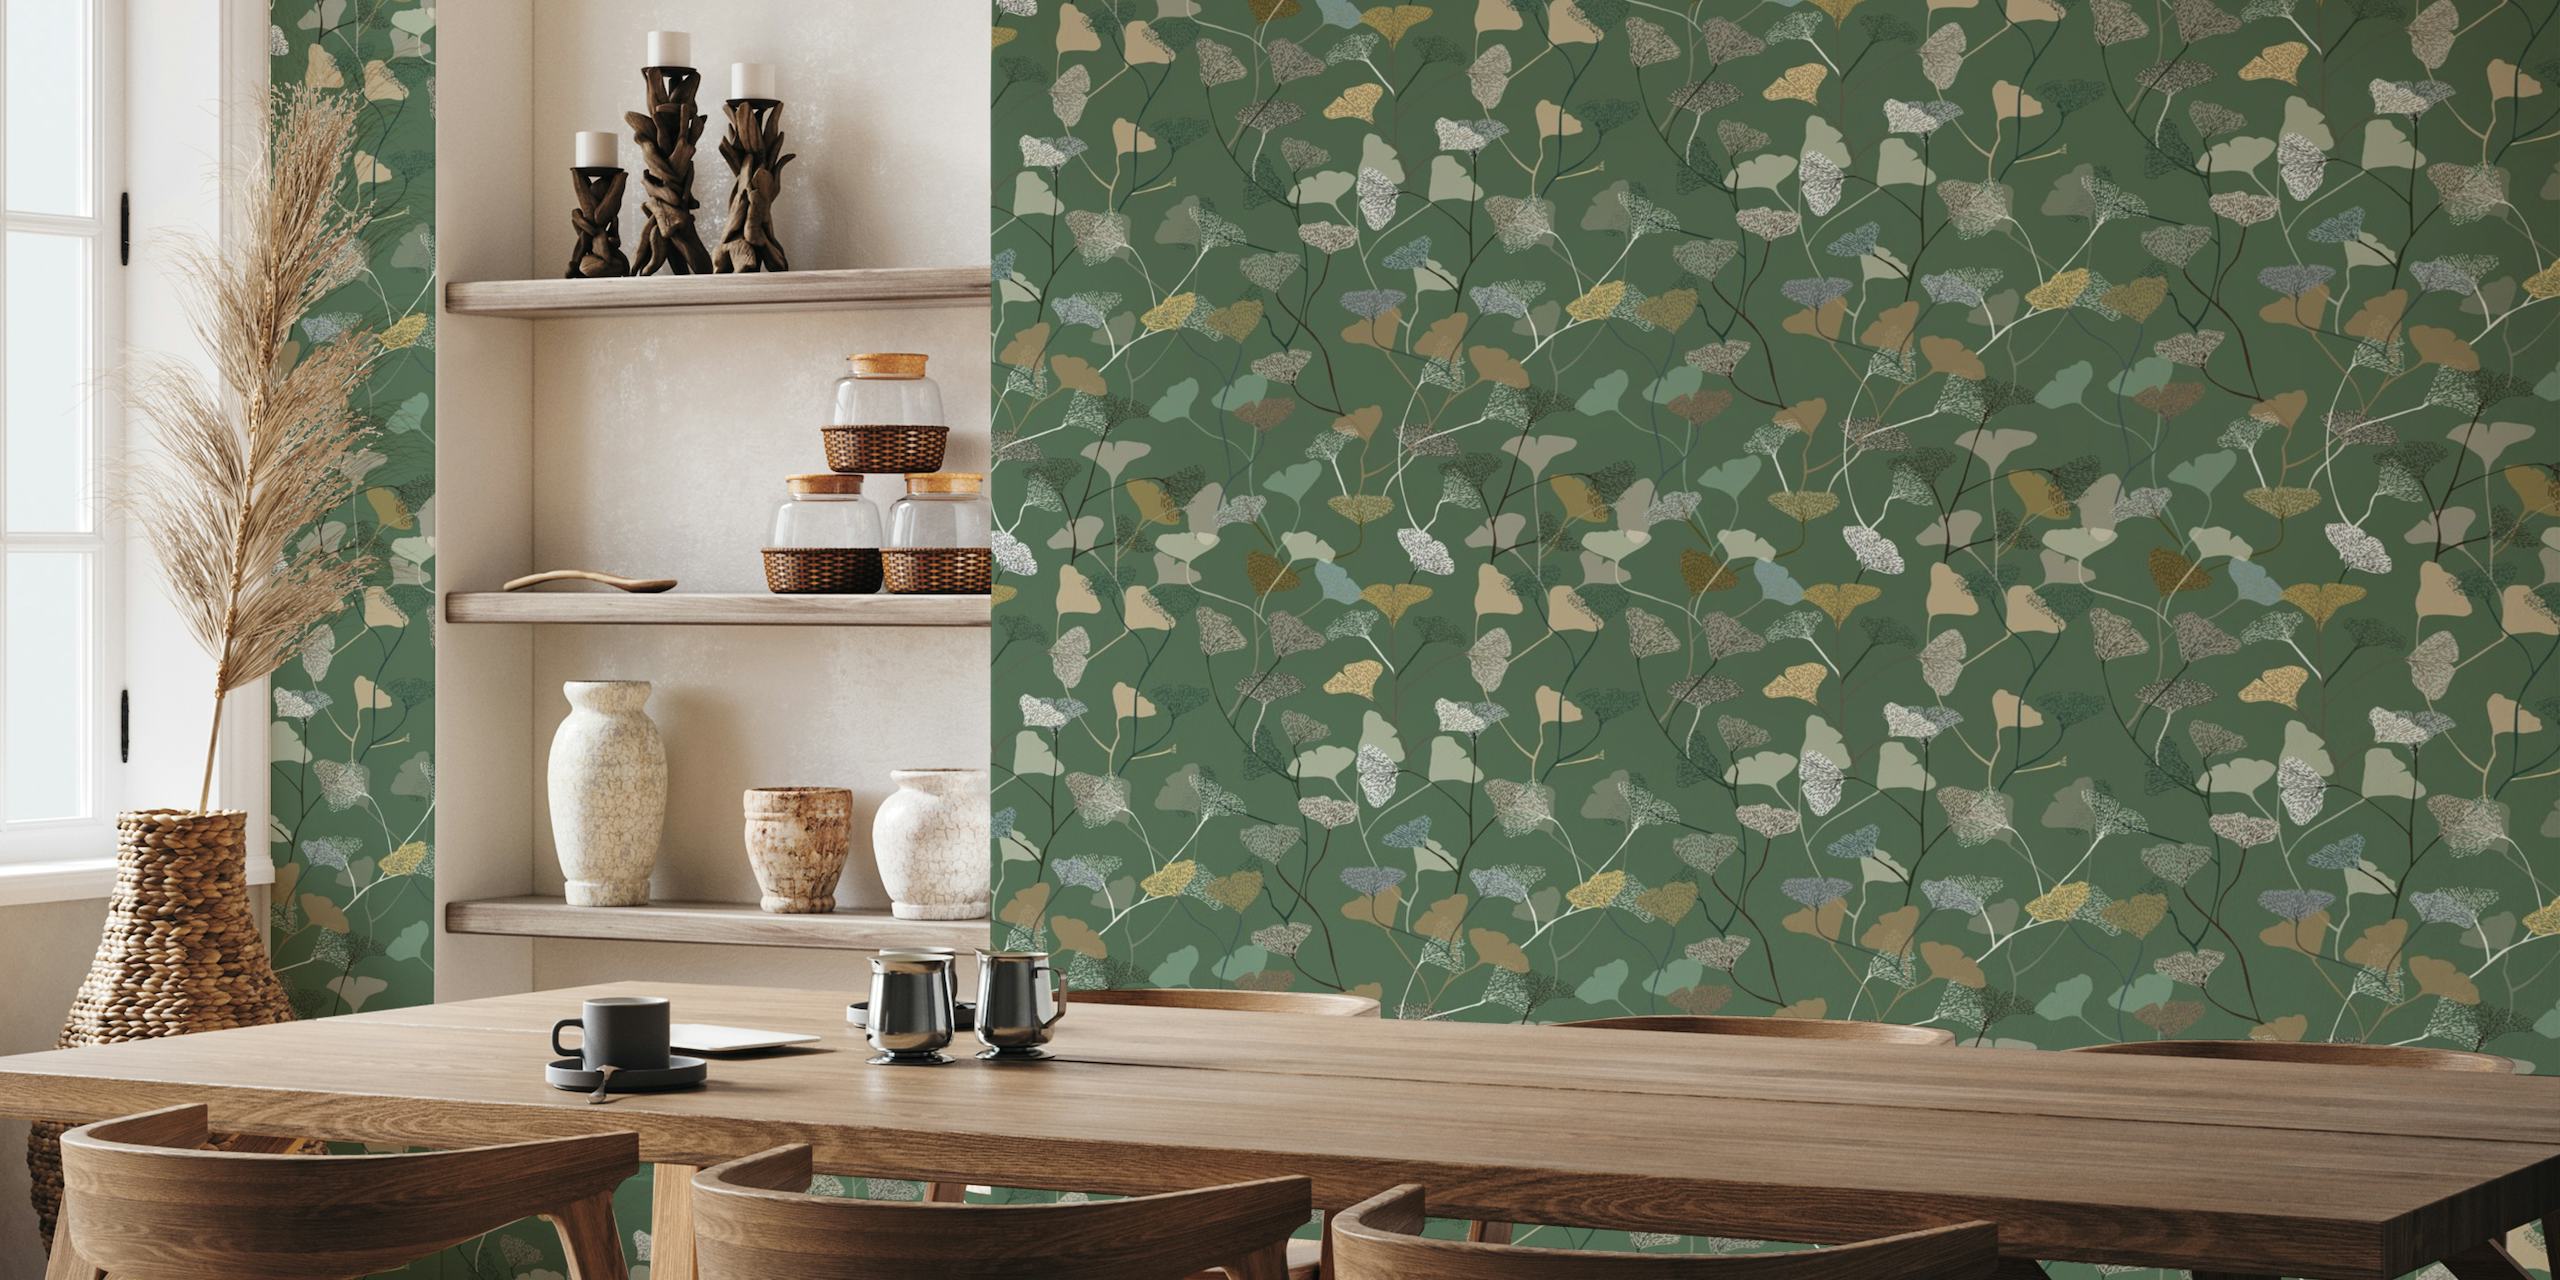 Ginkgo Leaves Green wall mural showcasing a pattern of ginkgo biloba leaves in varied shades of green with golden and white accents.